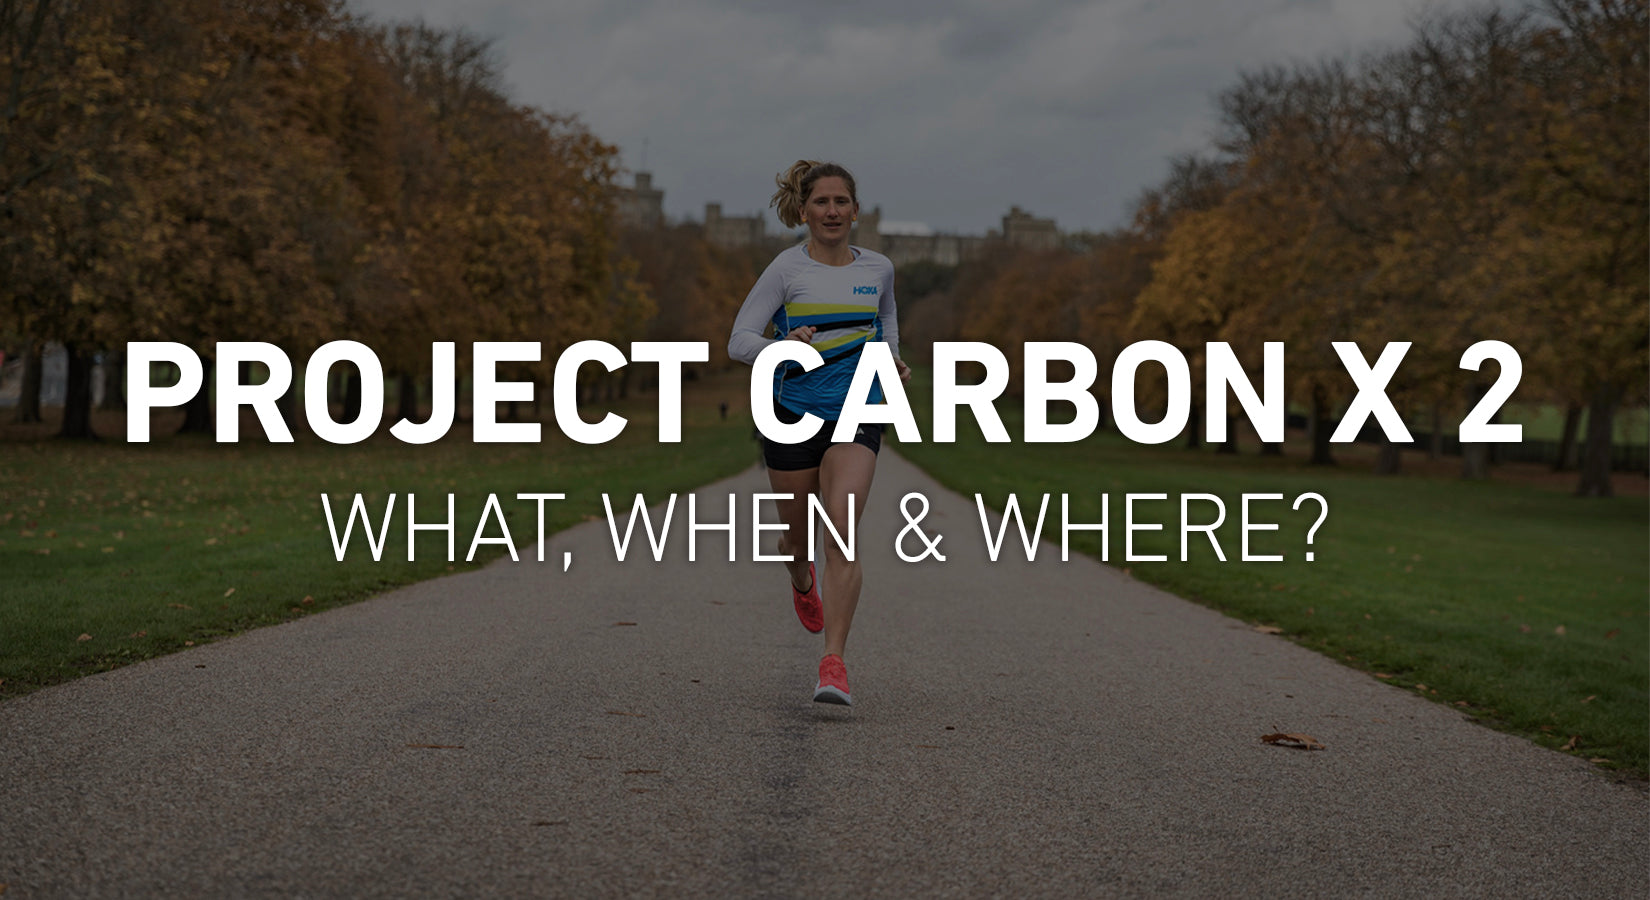 Project Carbon X 2 - What, When & Where?